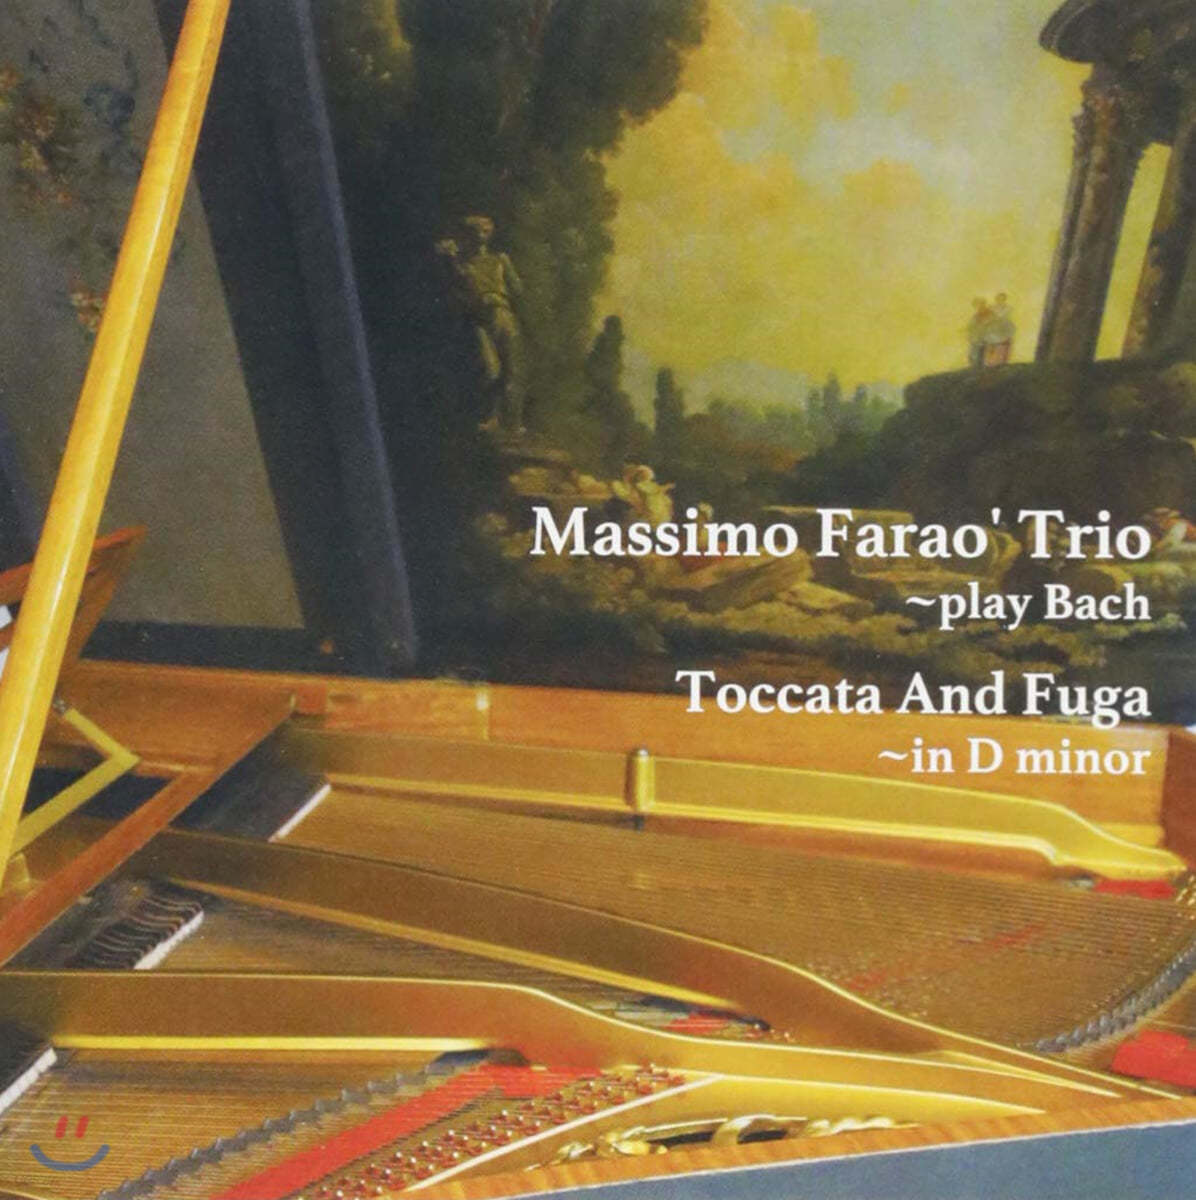 Massimo Farao' Trio (마시모 파라오 트리오) - Toccata and Fuga in D minor - Play Bach